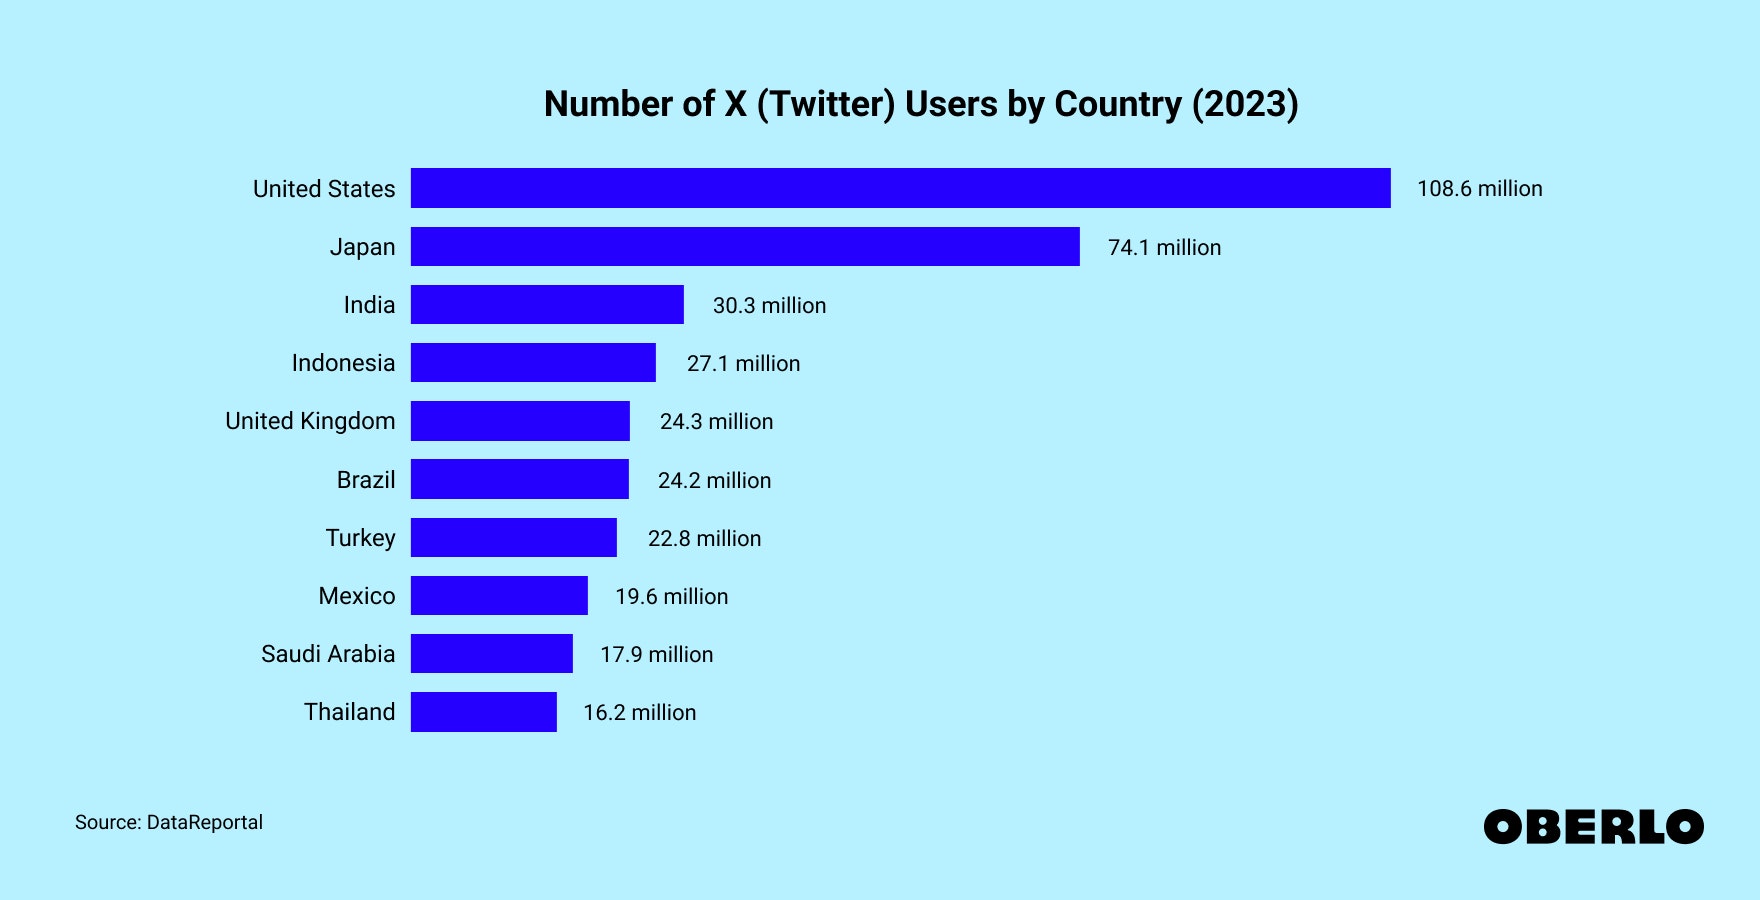 Chart showing the Number of Twitter Users by Country